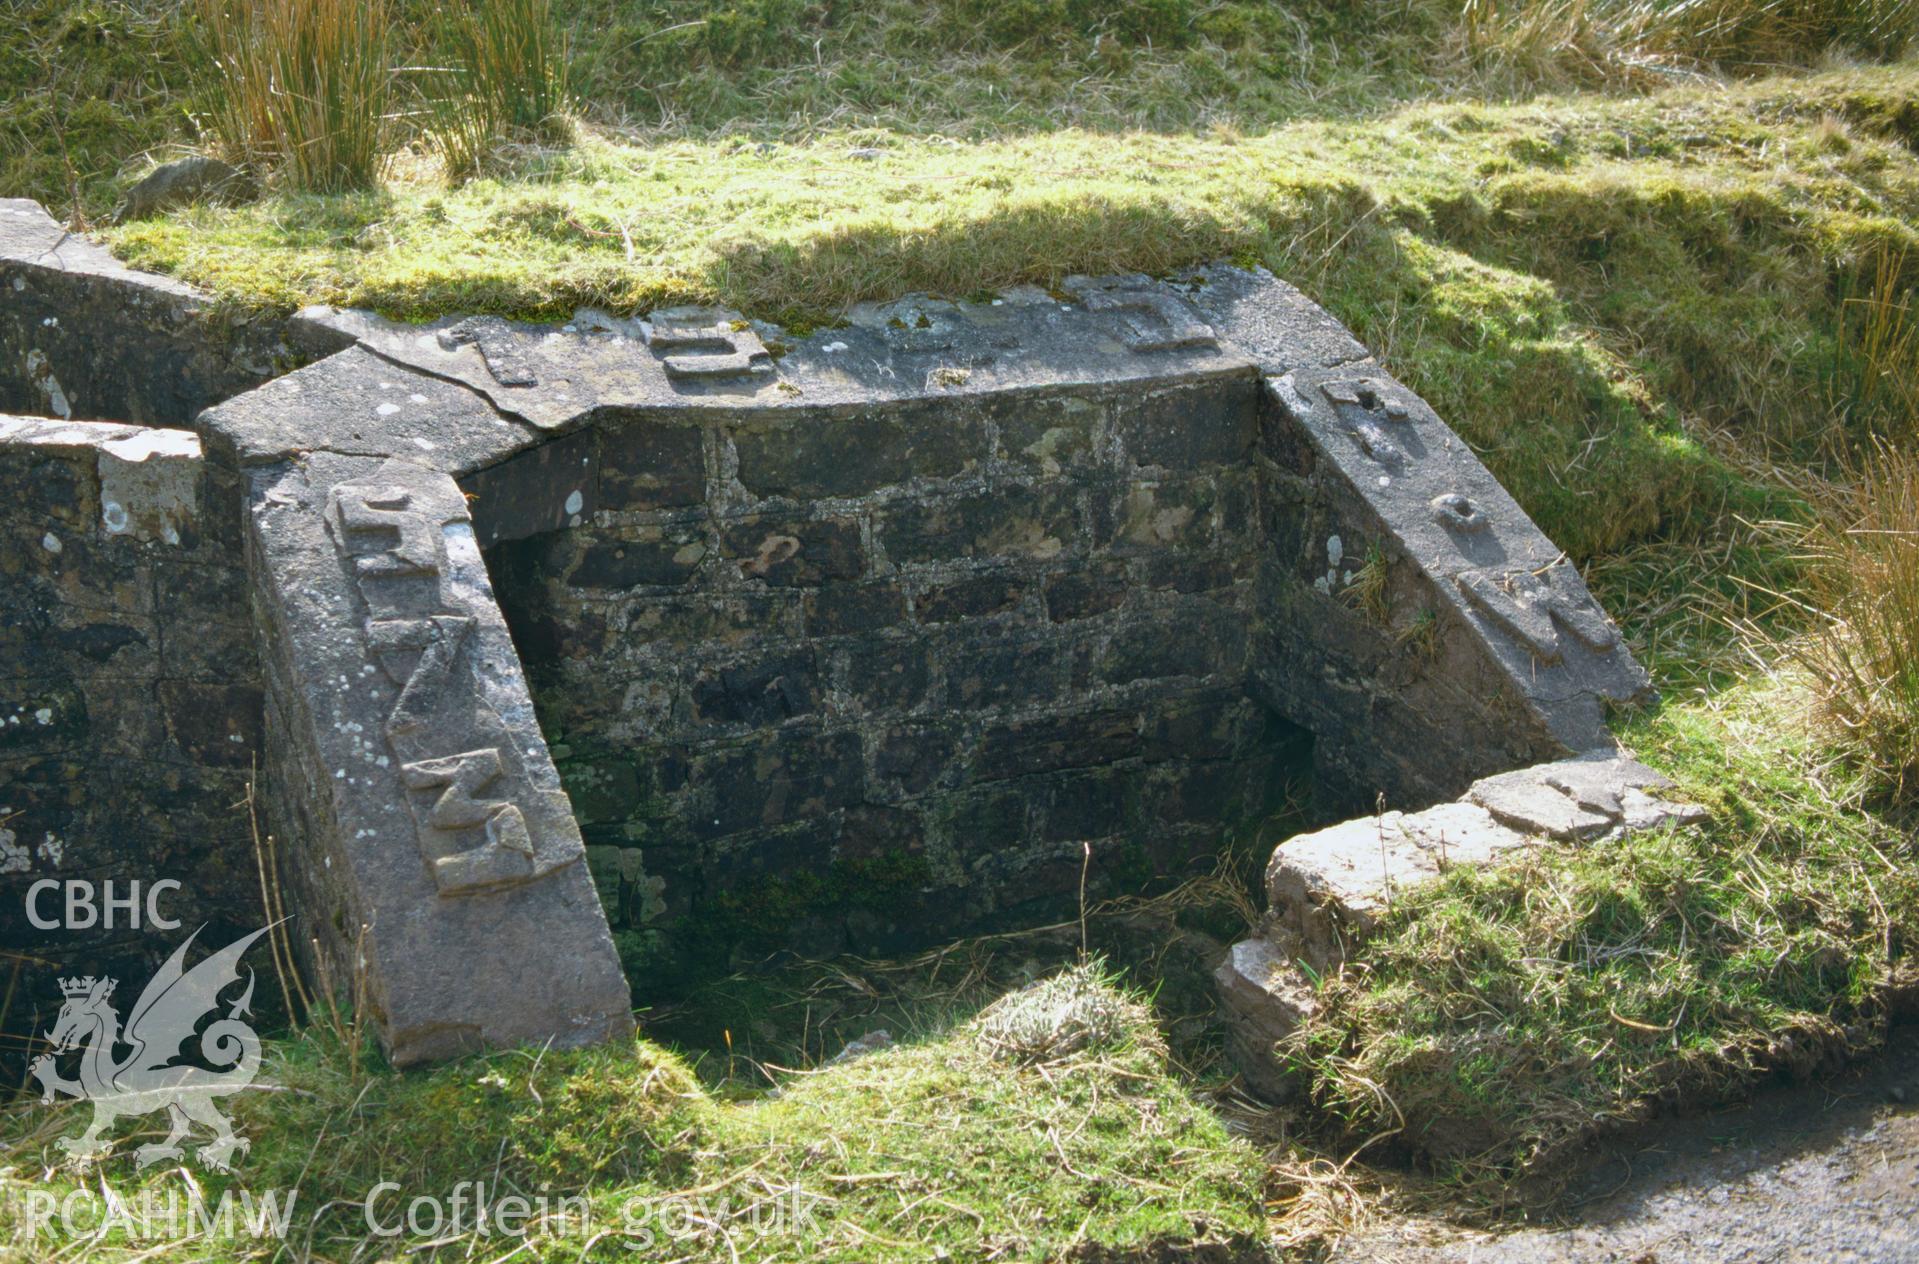 A concrete drainage culvert built by Italian Prisoners of War alongside a military road ('Op Road') on Sennybridge Training Area in 1944, inscribed in raised concrete lettering '573 PoW 1945'.